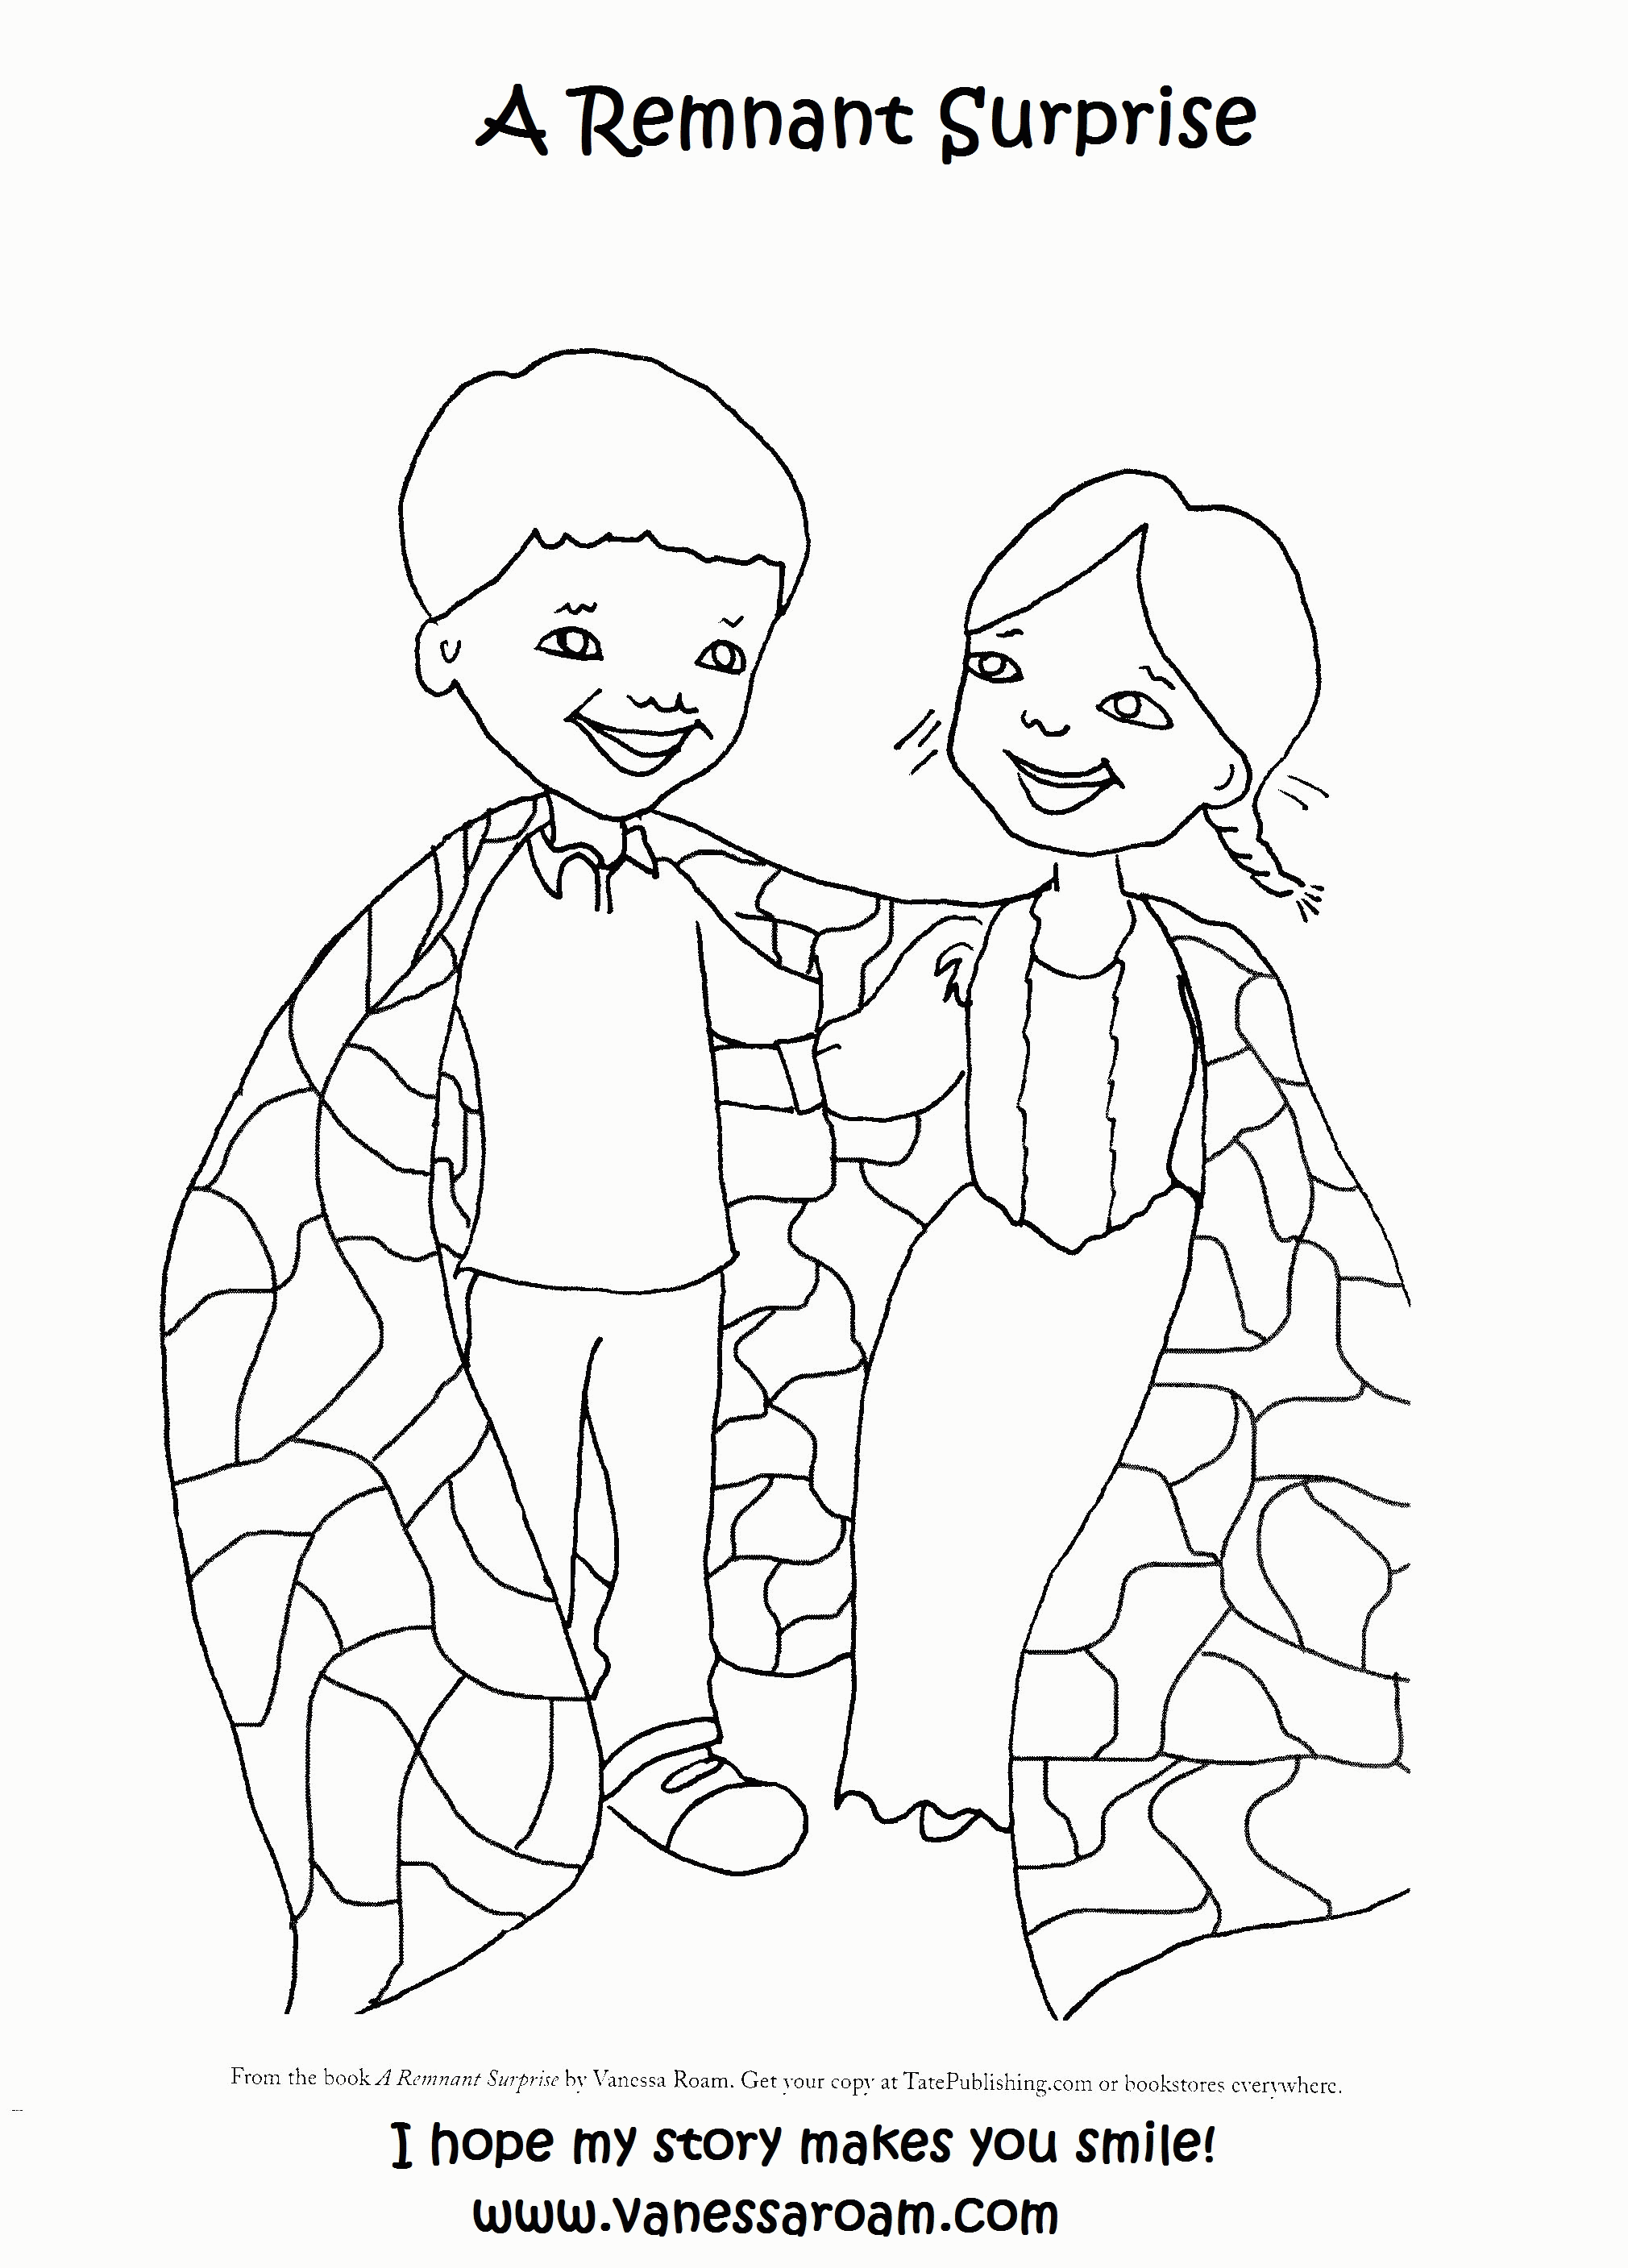 Acts 20 Coloring Pages - Ð¡oloring Pages For All Ages